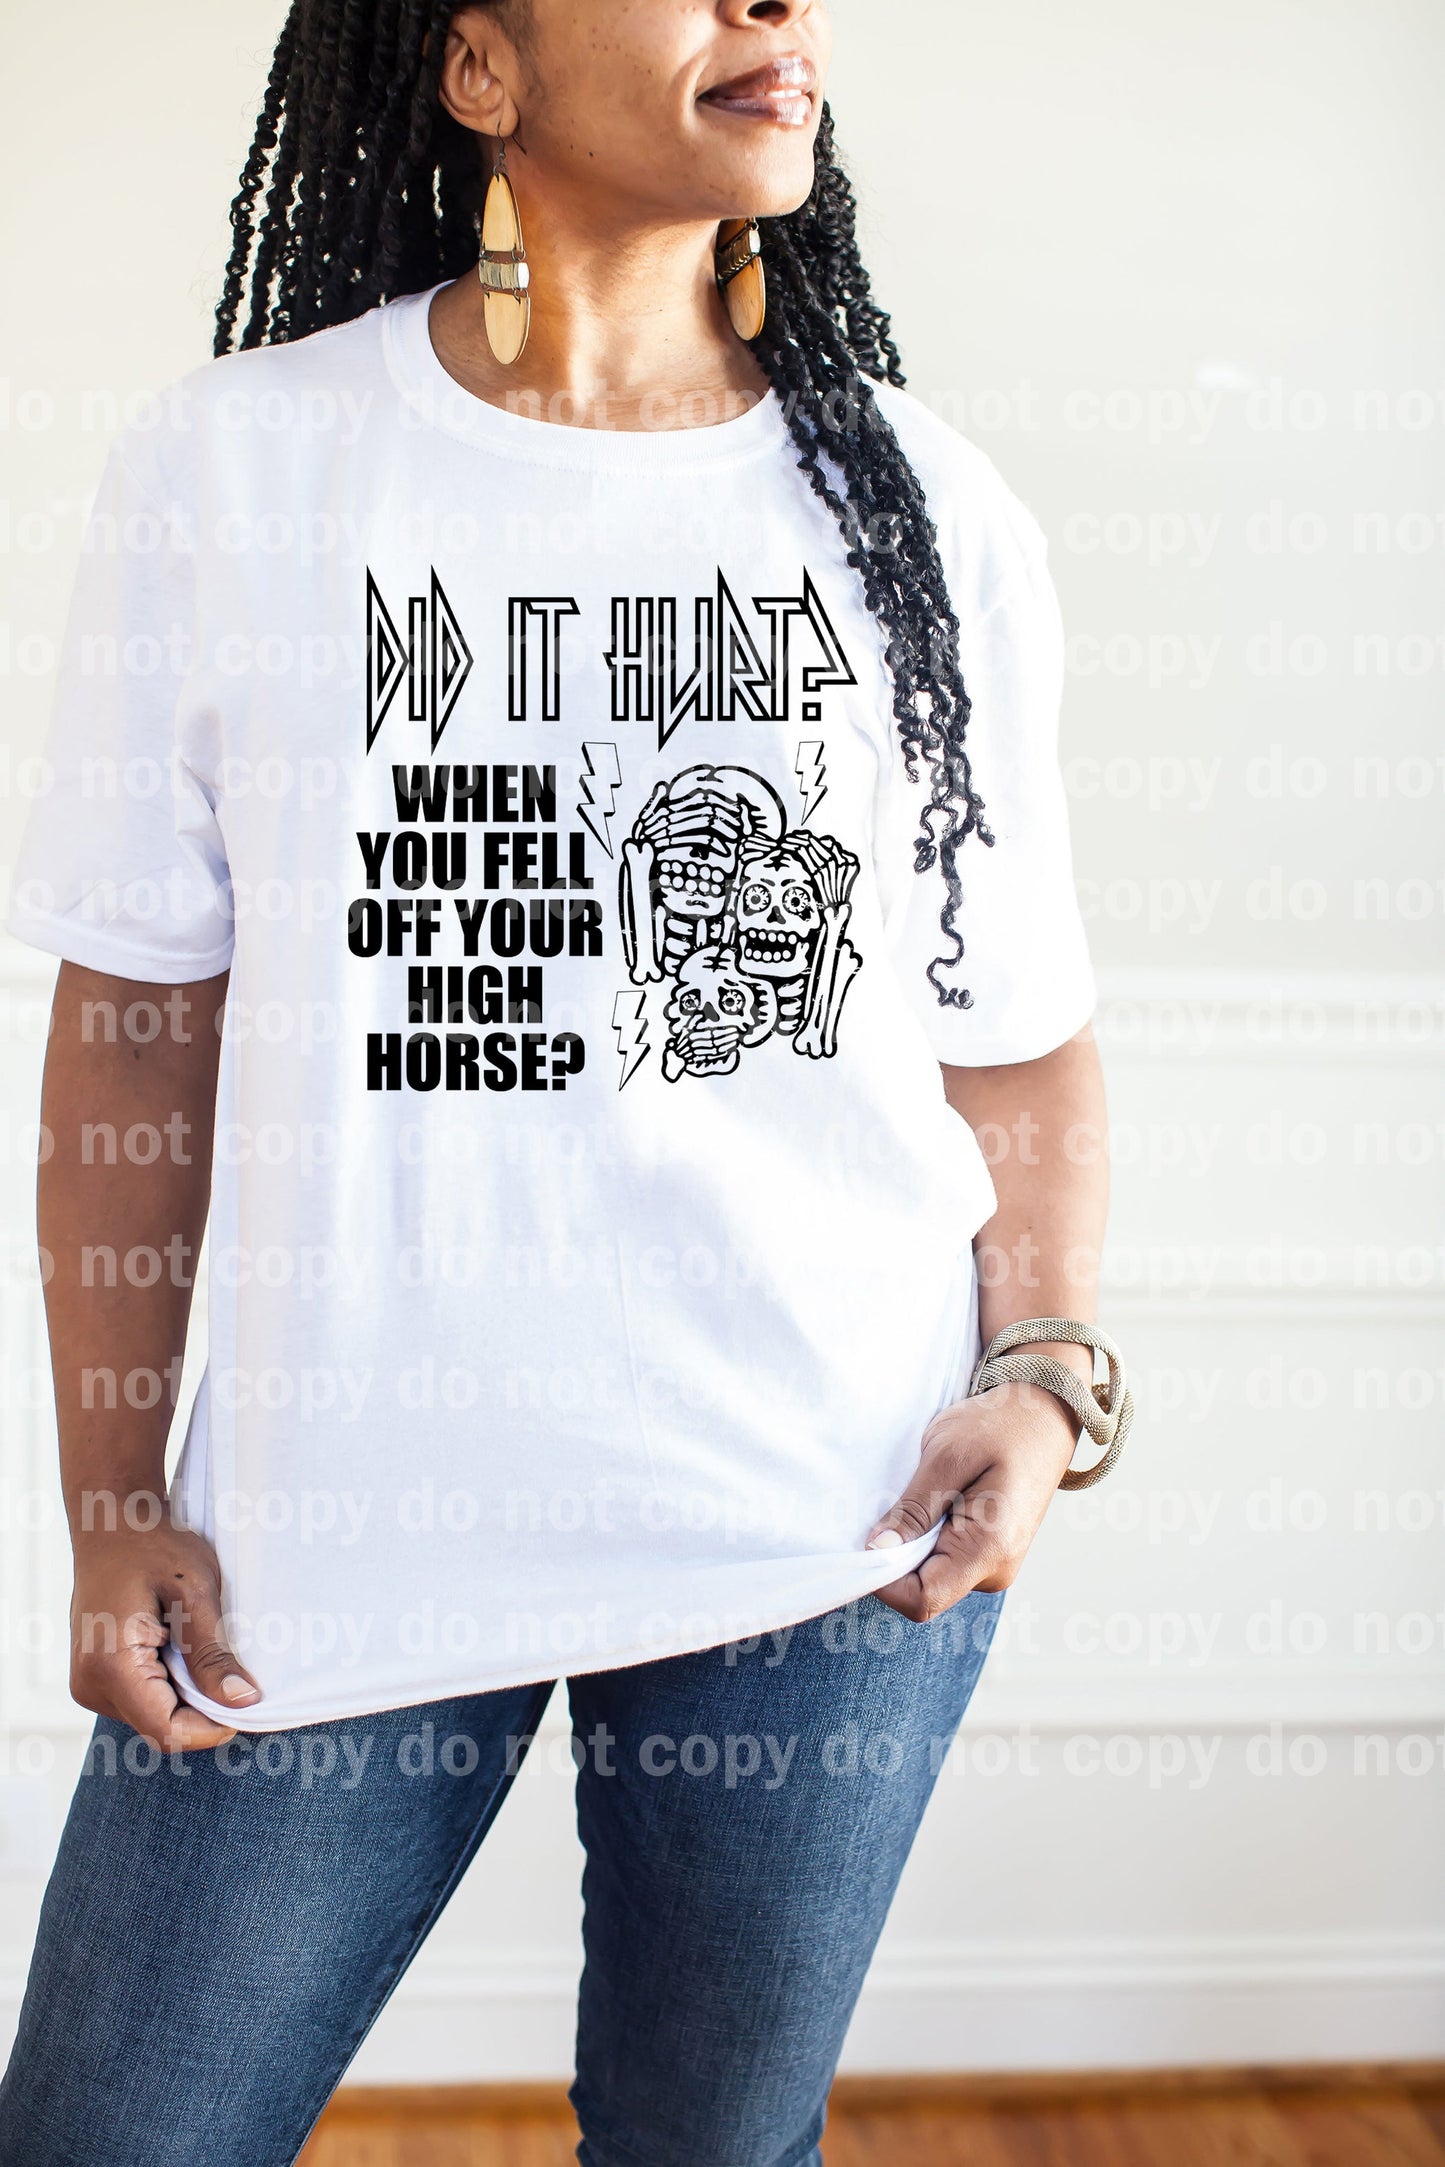 Did It Hurt When You Feel Off Your High Horse Dream Print or Sublimation Print